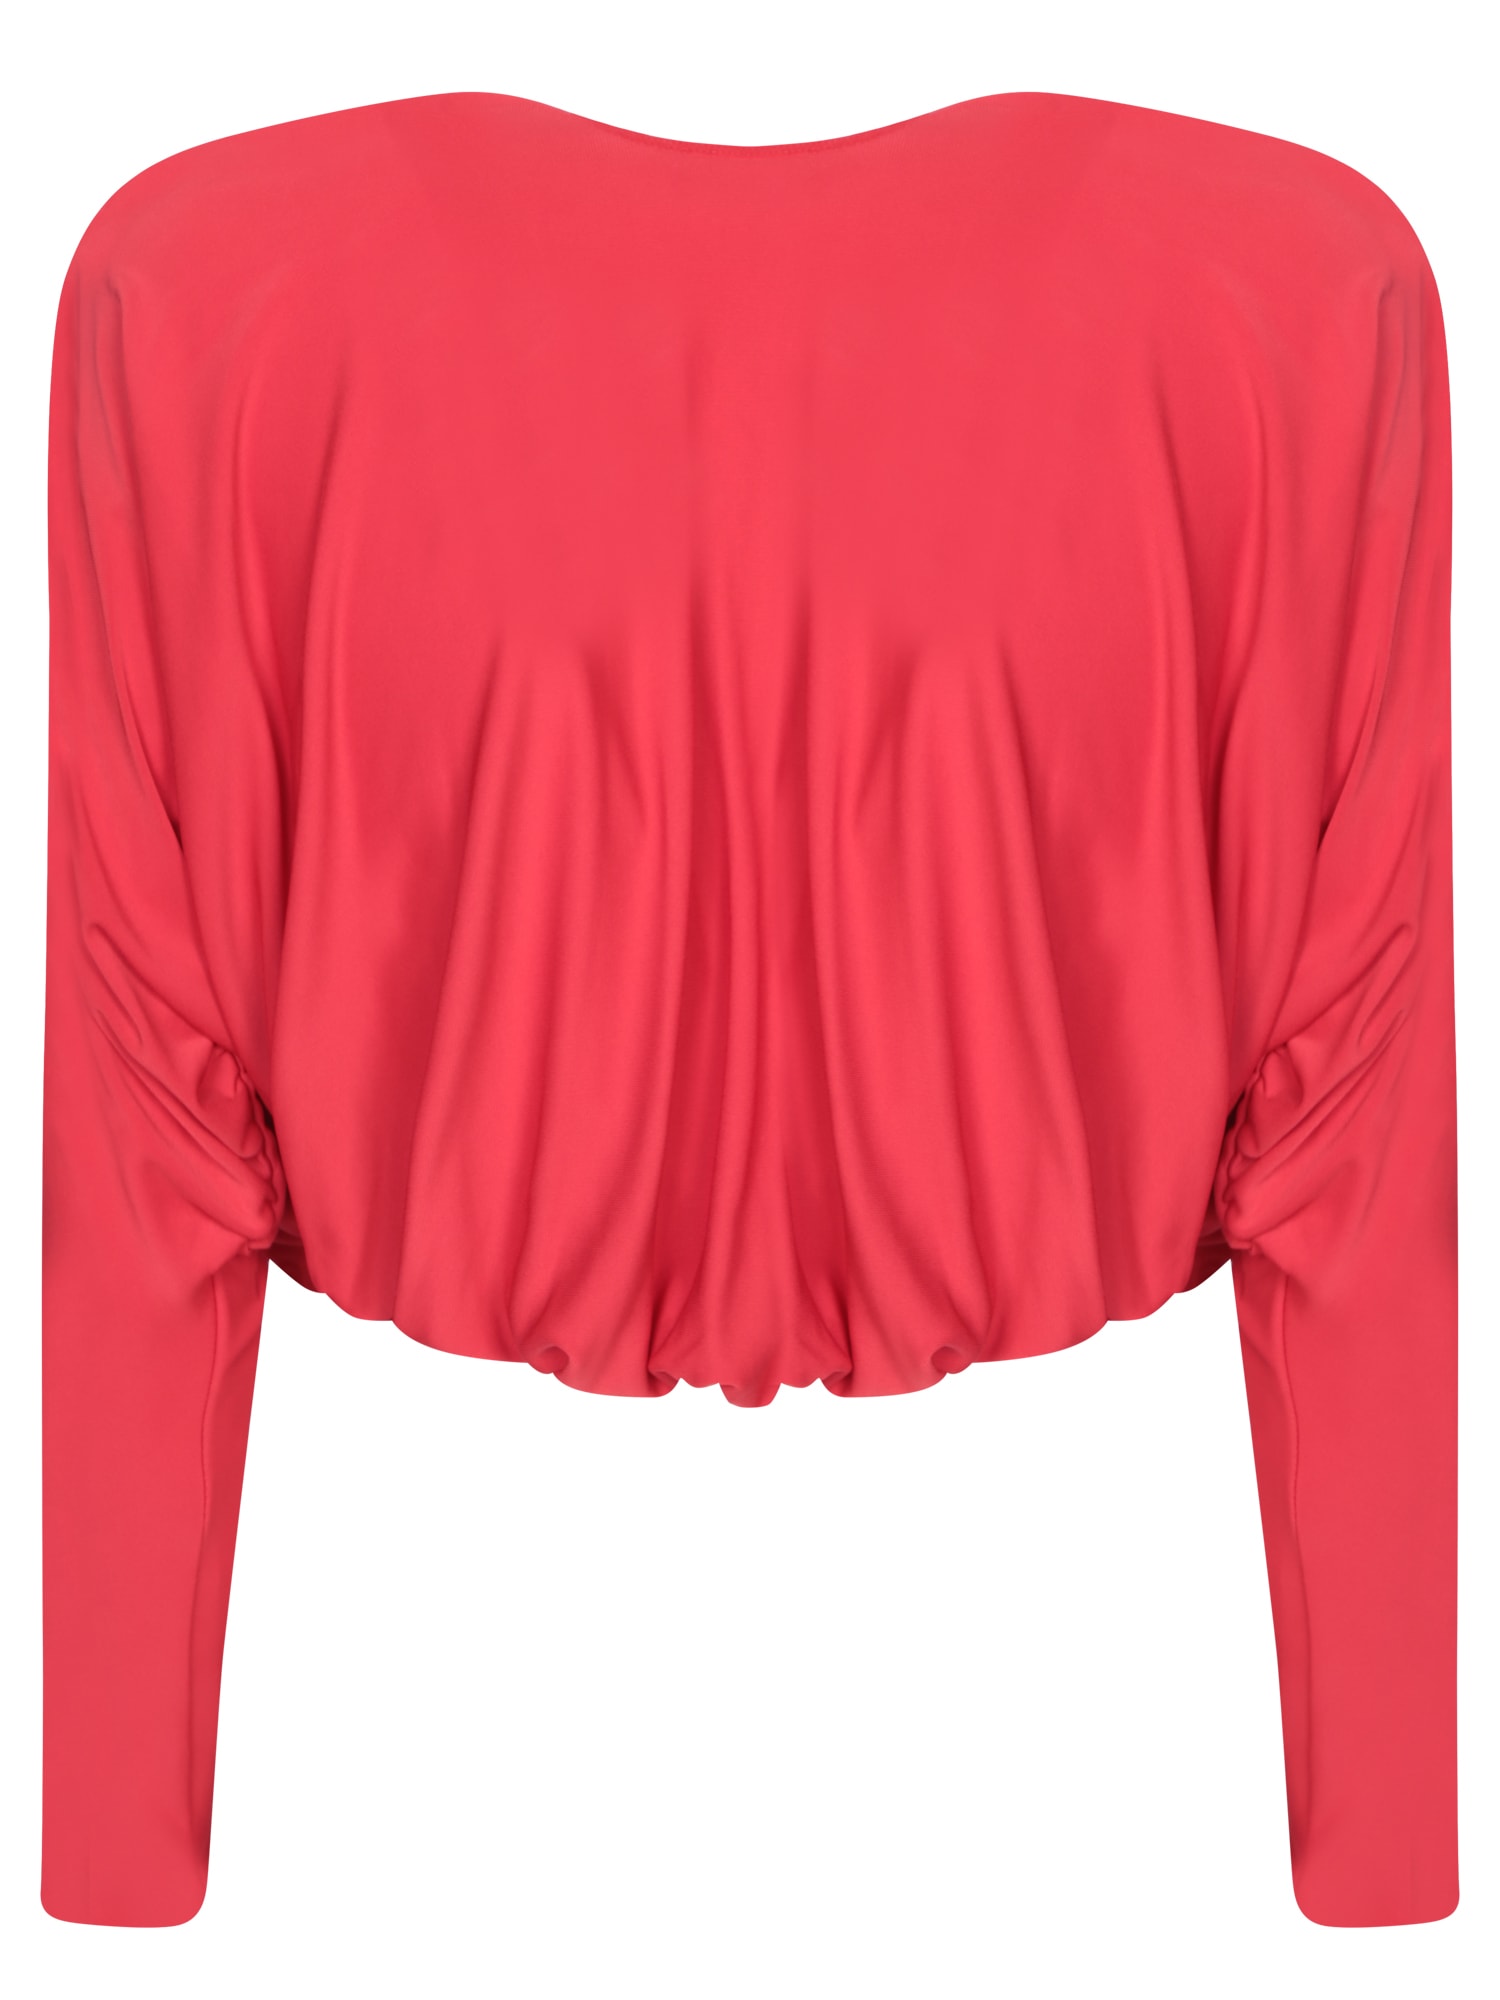 Shop Alice And Olivia Red Cropped Twist Blouse Alice + Olivia